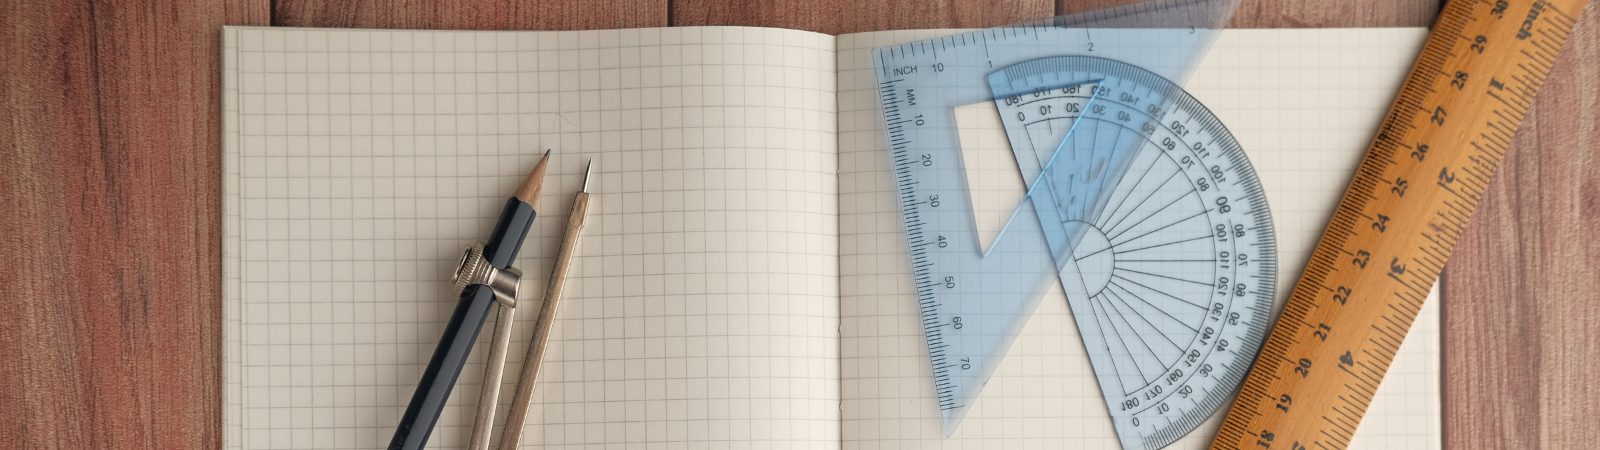 a notebook with a ruler and a pencil